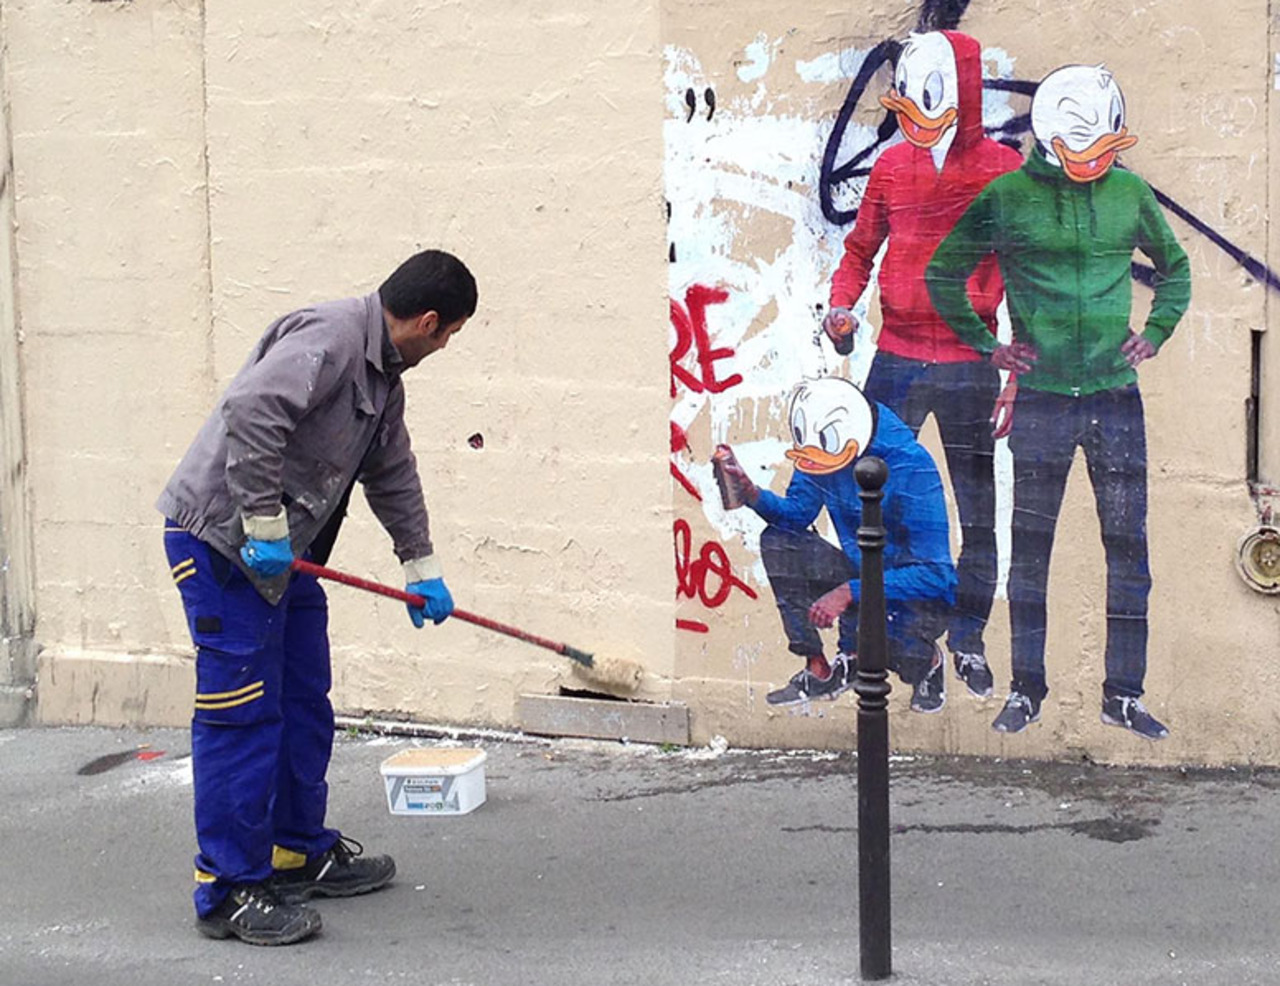 RT @_inkster_: This is too #funny! #Graffiti removal guy gets turned into #streetart in #Paris http://goo.gl/UmpNsS http://t.co/DoAnlUxoGi